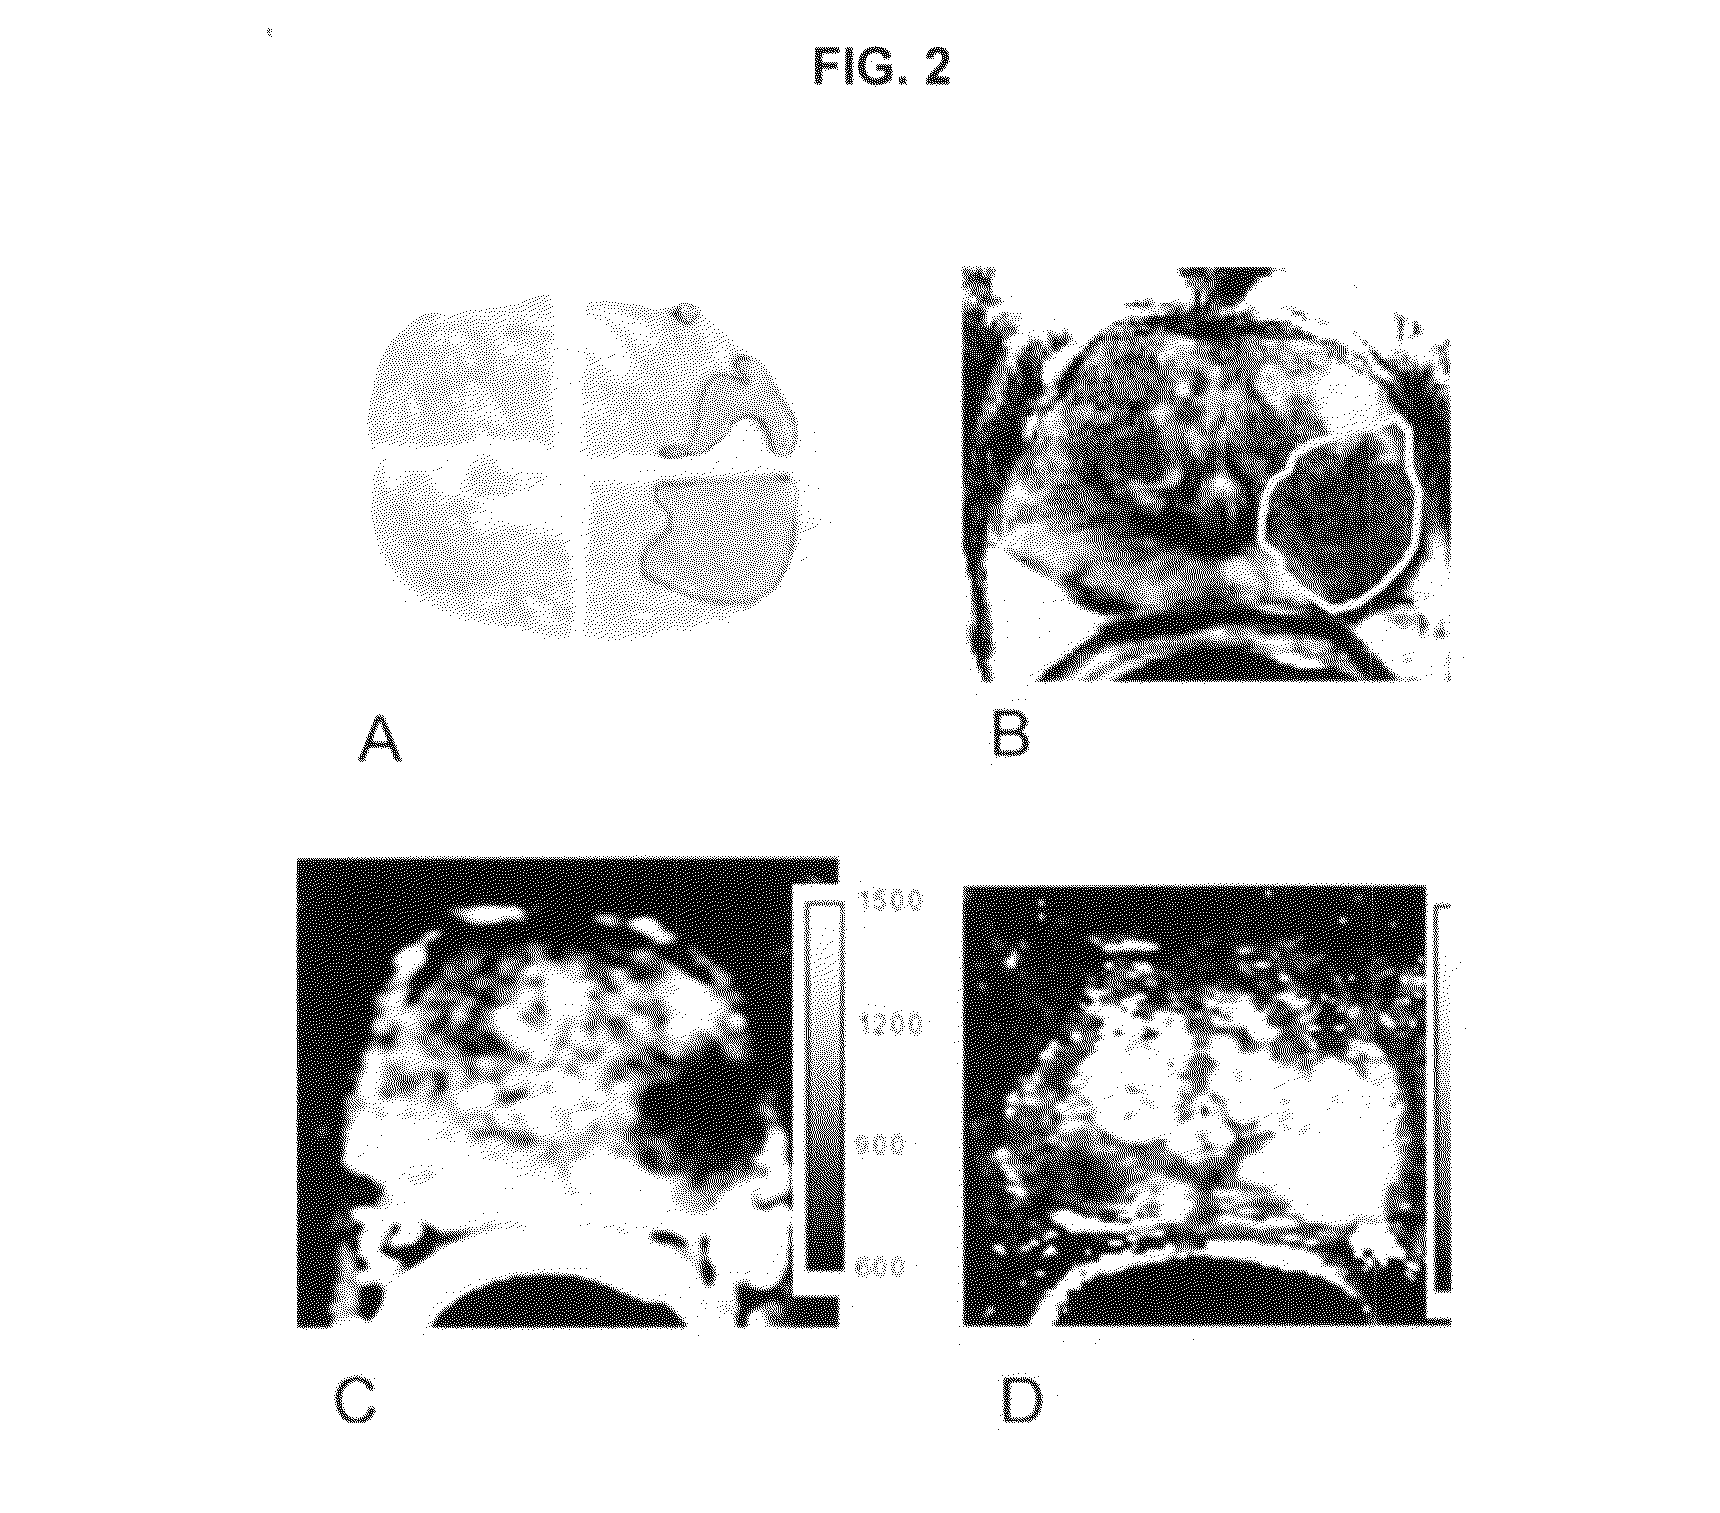 System and method of guided treatment within malignant prostate tissue